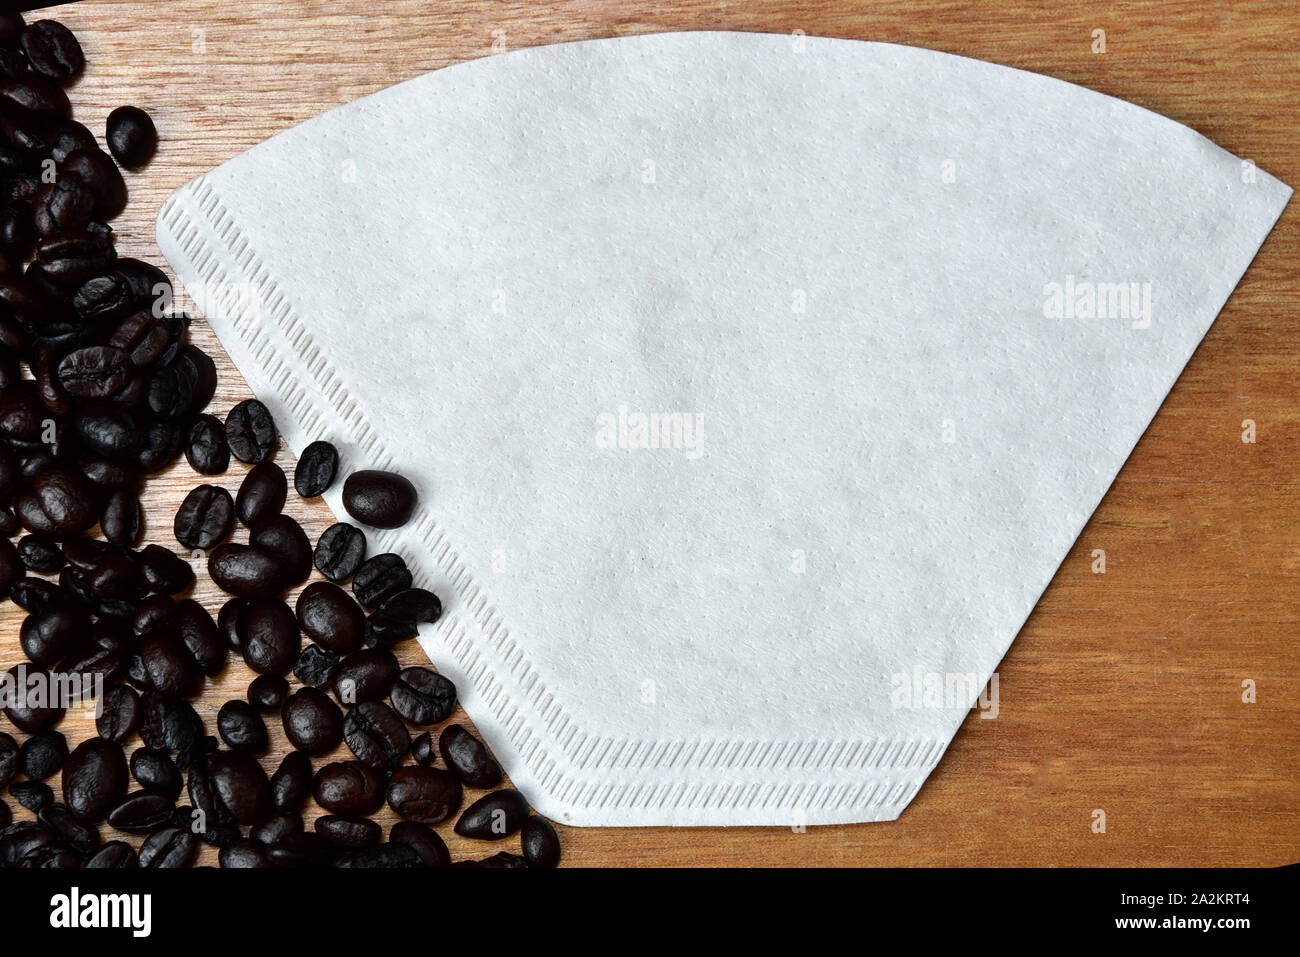 roasted coffee bean and paper colander Stock Photo